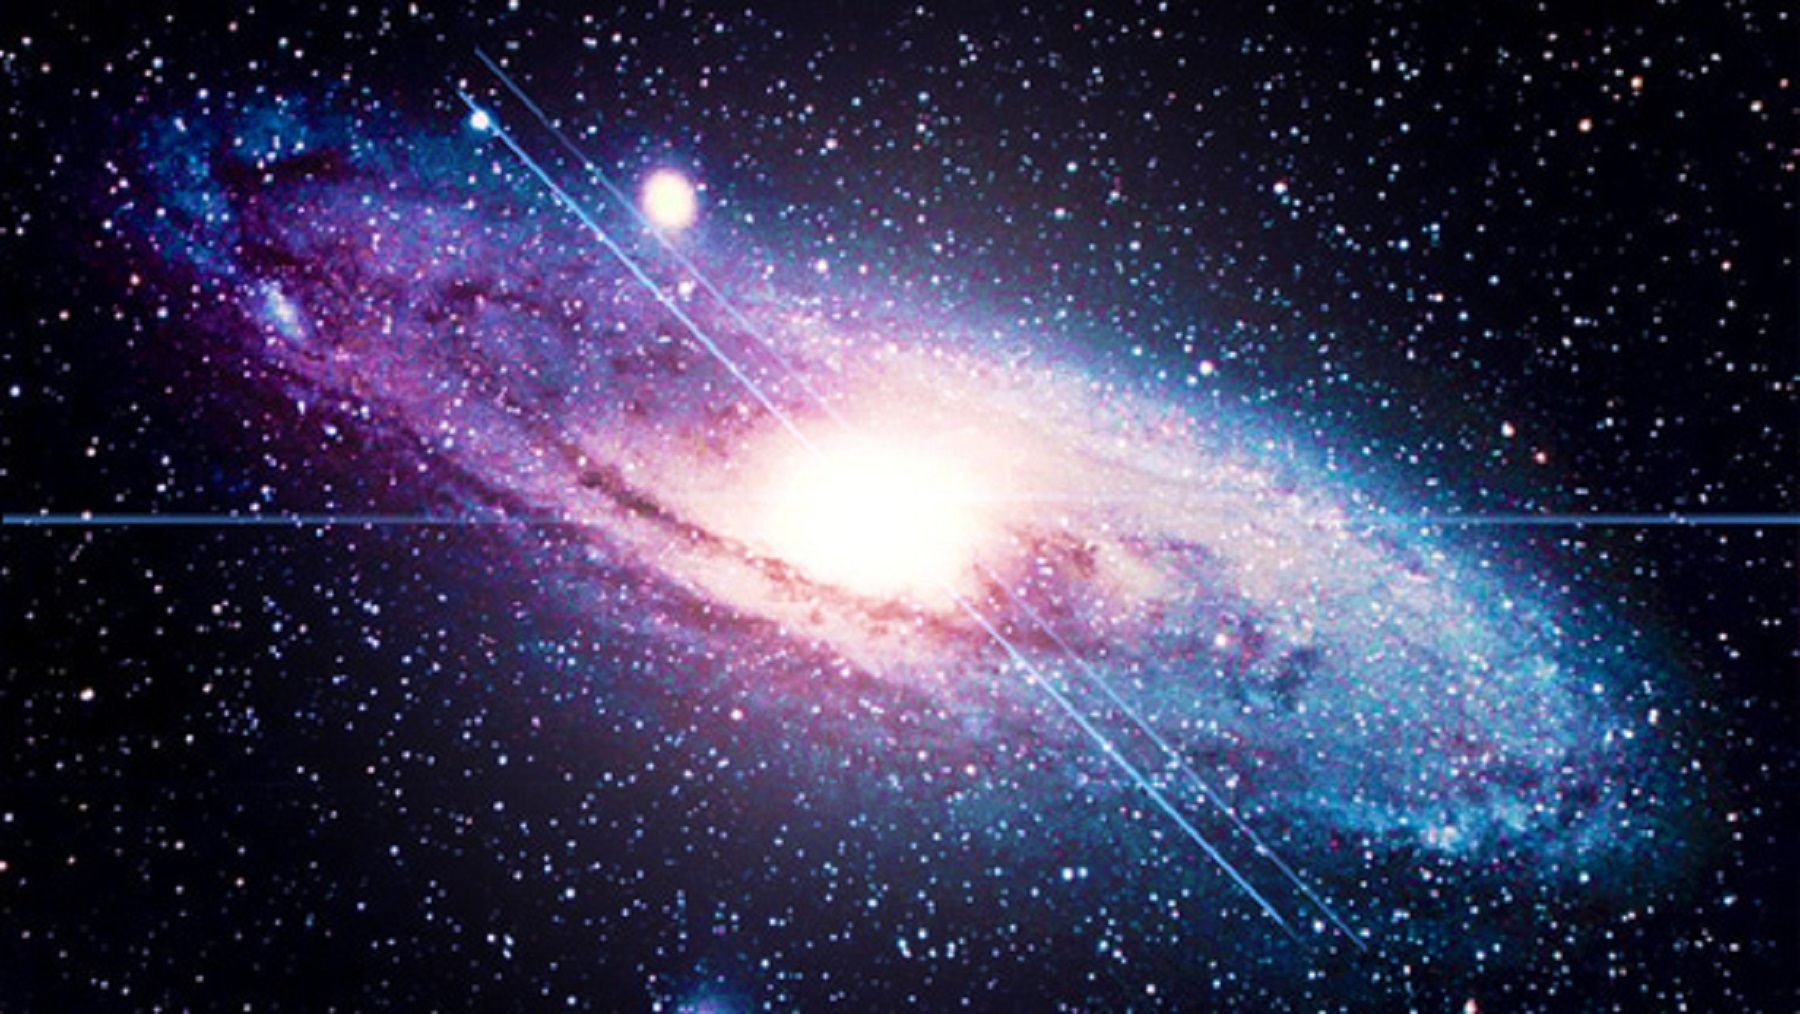 Free download Andromeda Galaxy Wallpaper HD Pics about space